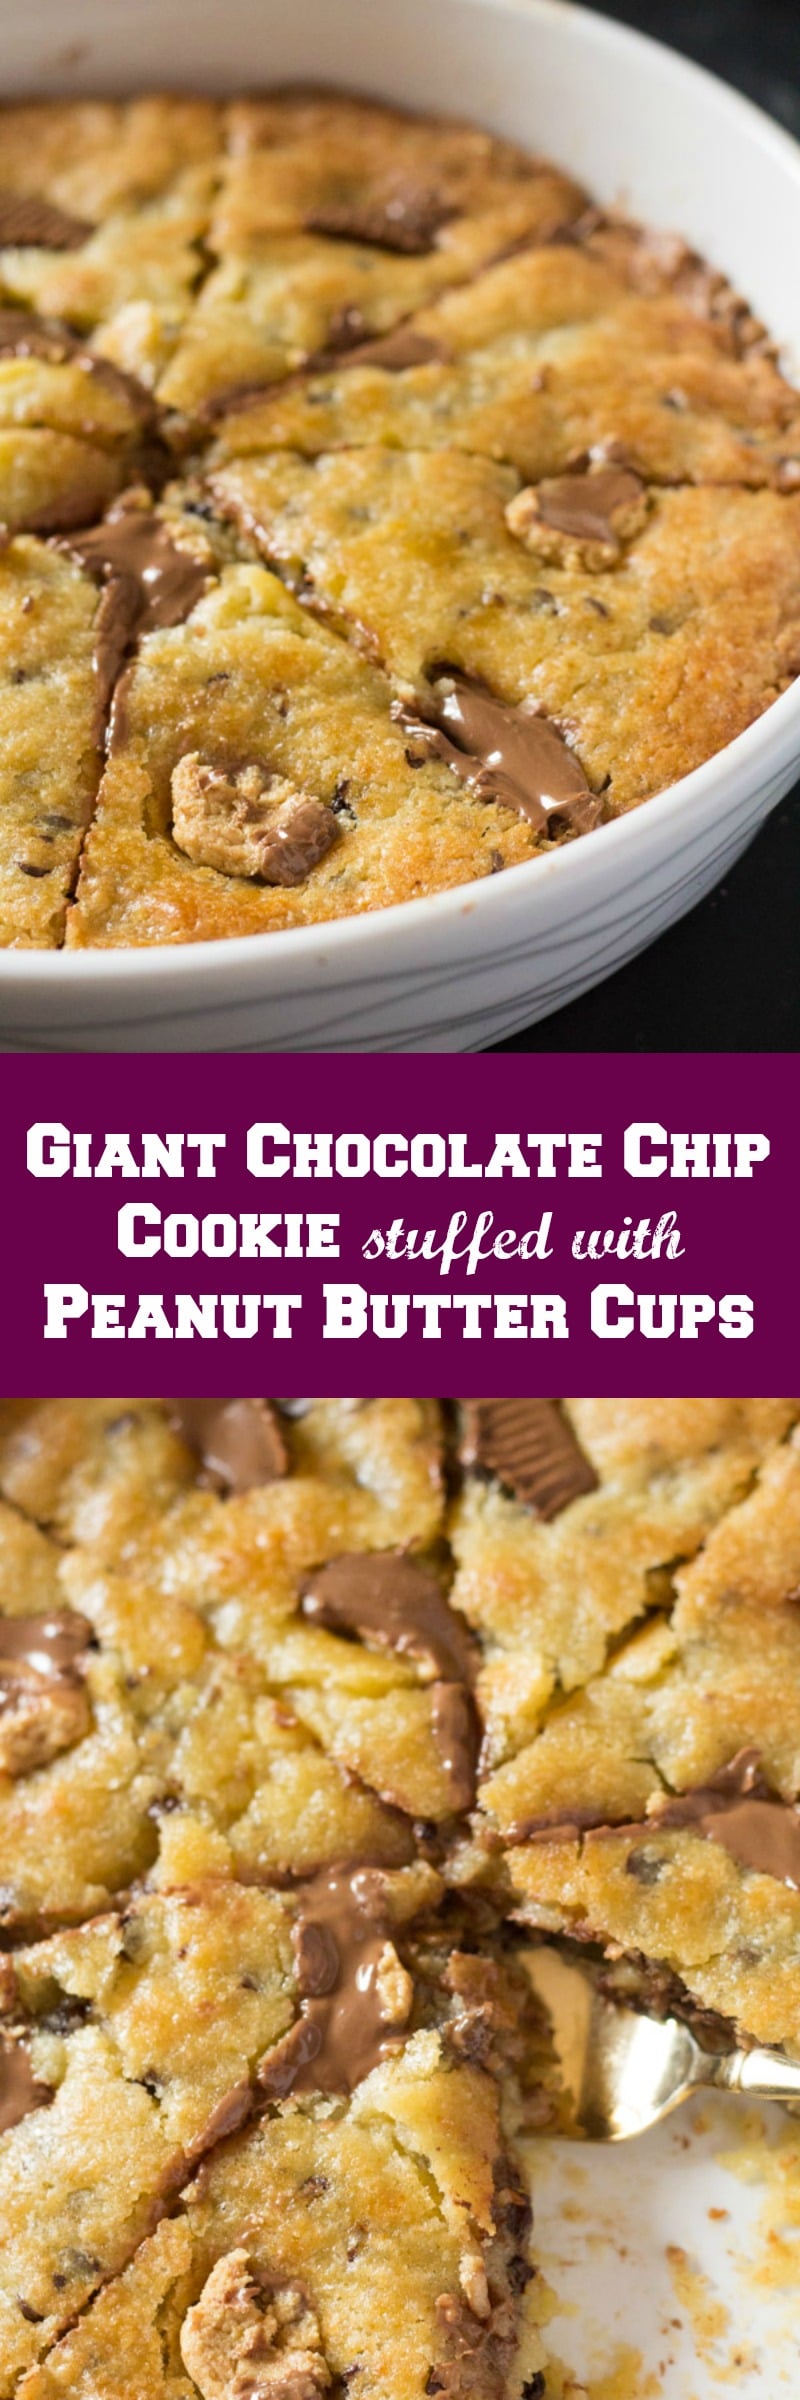 Giant Chocolate Chip Cookie stuffed with Peanut Butter Cups